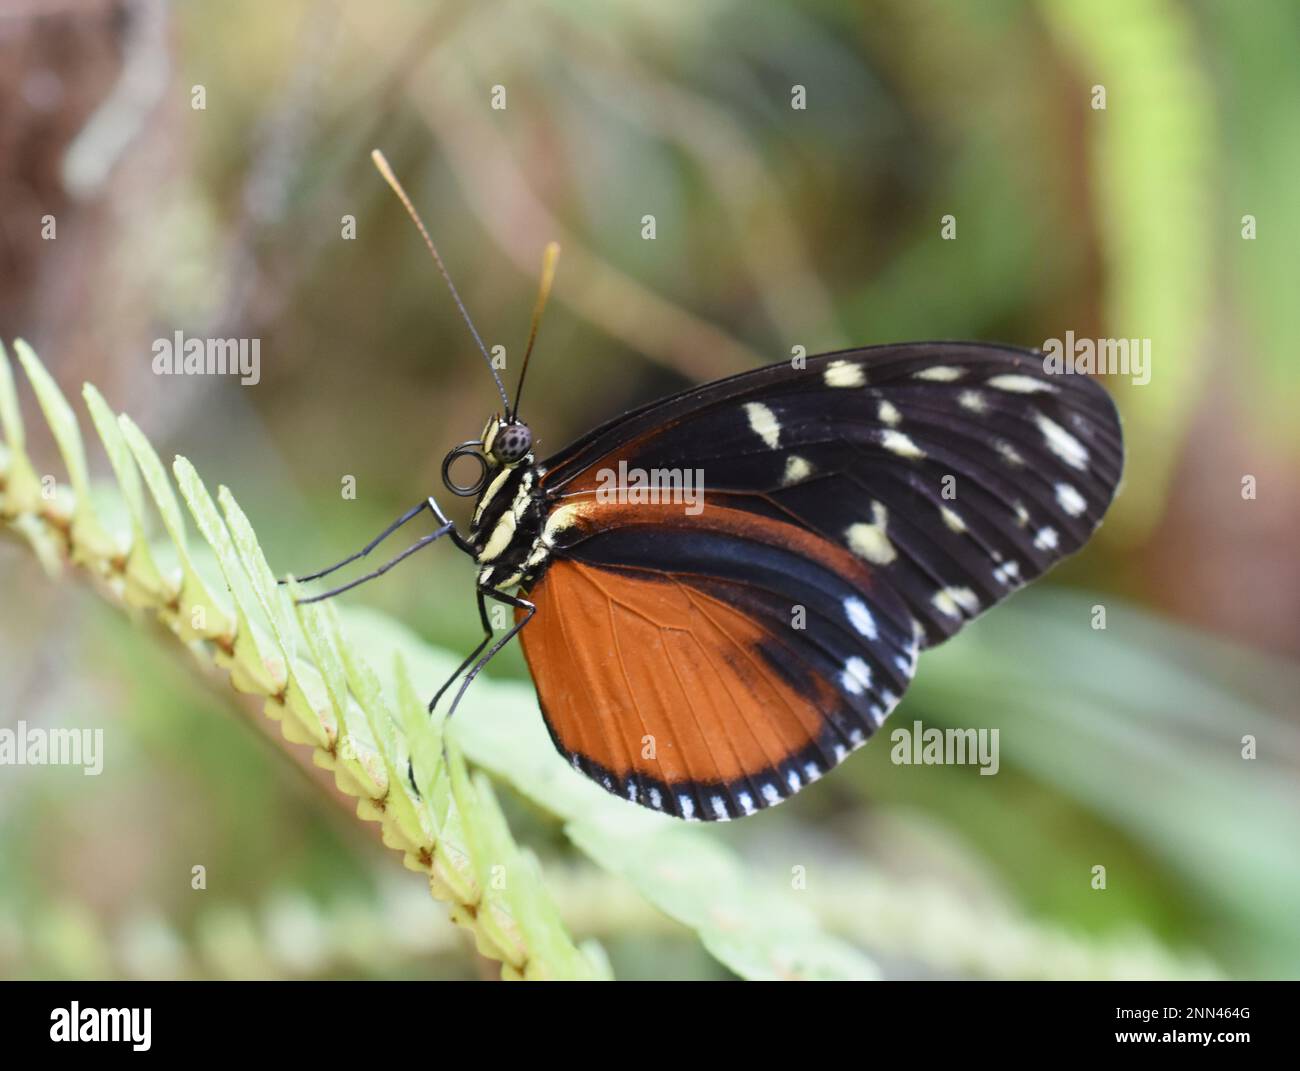 The tiger longwing butterfly Heliconius hecale sitting on a leaf Stock Photo